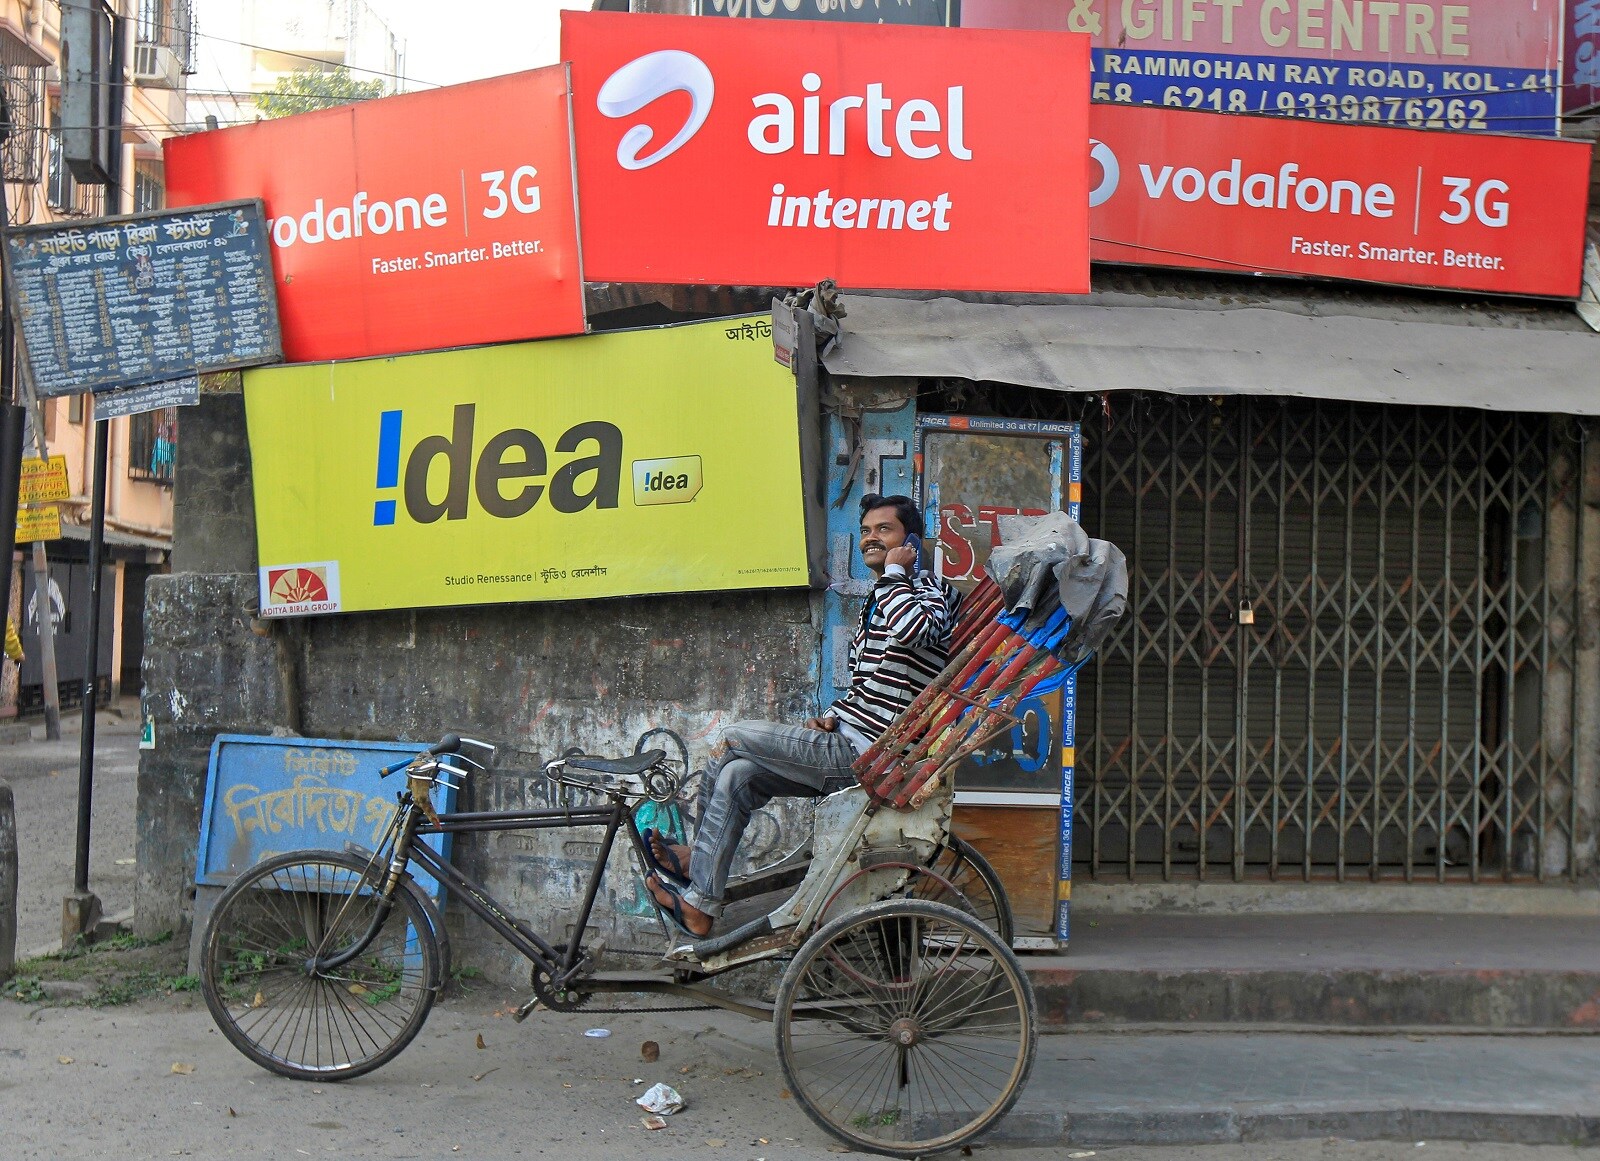  Telecom stocks  | Bharti Airtel and Vodafone Idea lost around 47 lakh mobile customers each in May. The total wireless customer base of Airtel and Vodafone Idea fell to 31.7 crore and 30.9 crore, respectively.